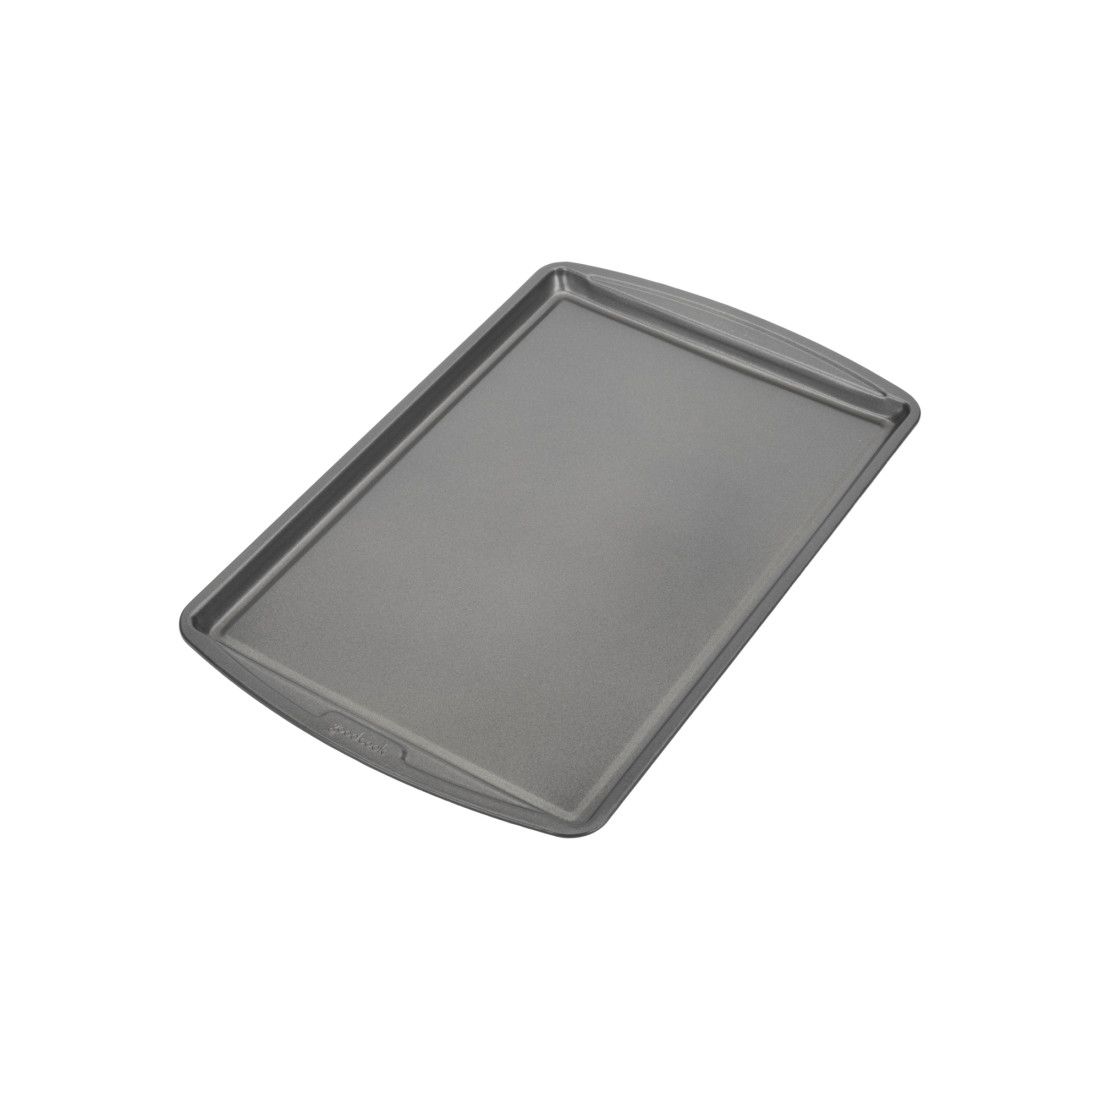 GoodCook Everyday Nonstick Steel 3pc Baking Sheet Set , 17 x 11, 15 x  10 and 9 x 13, Gray - GoodCook